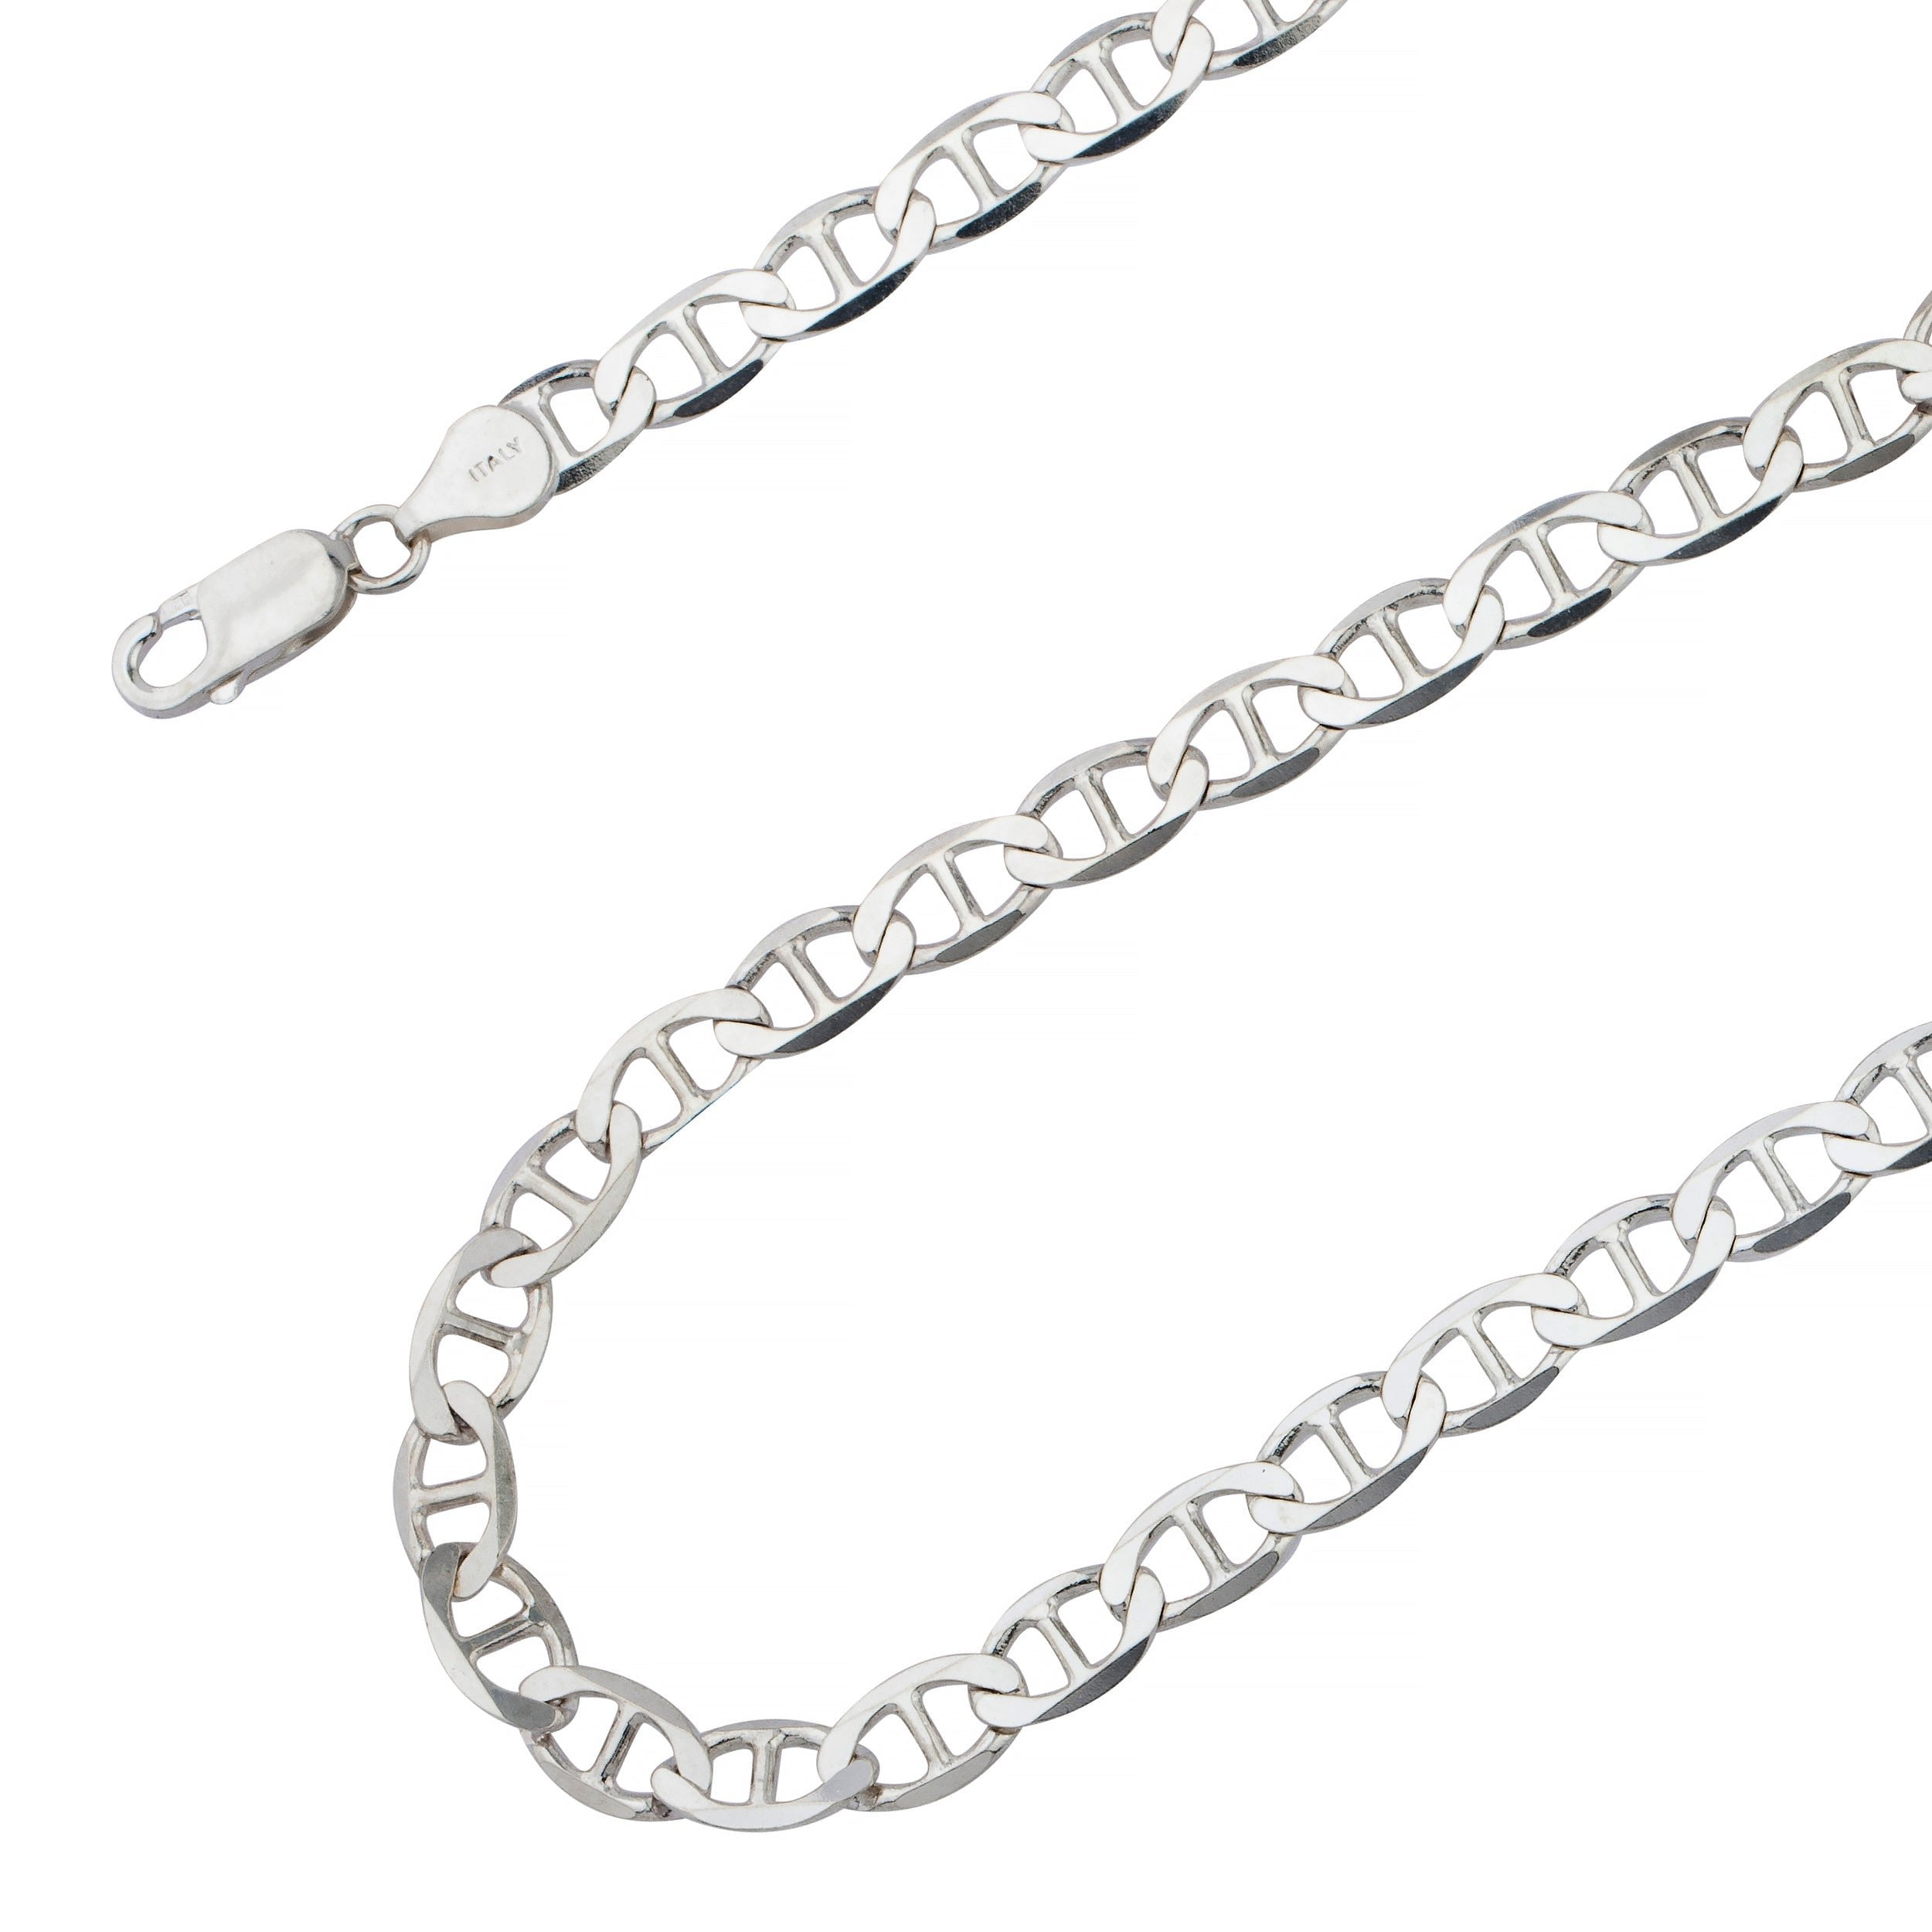 Genuine 925 Sterling Silver Tarnish-Resist 16 0.9mm Thin Snake Chain  Necklace